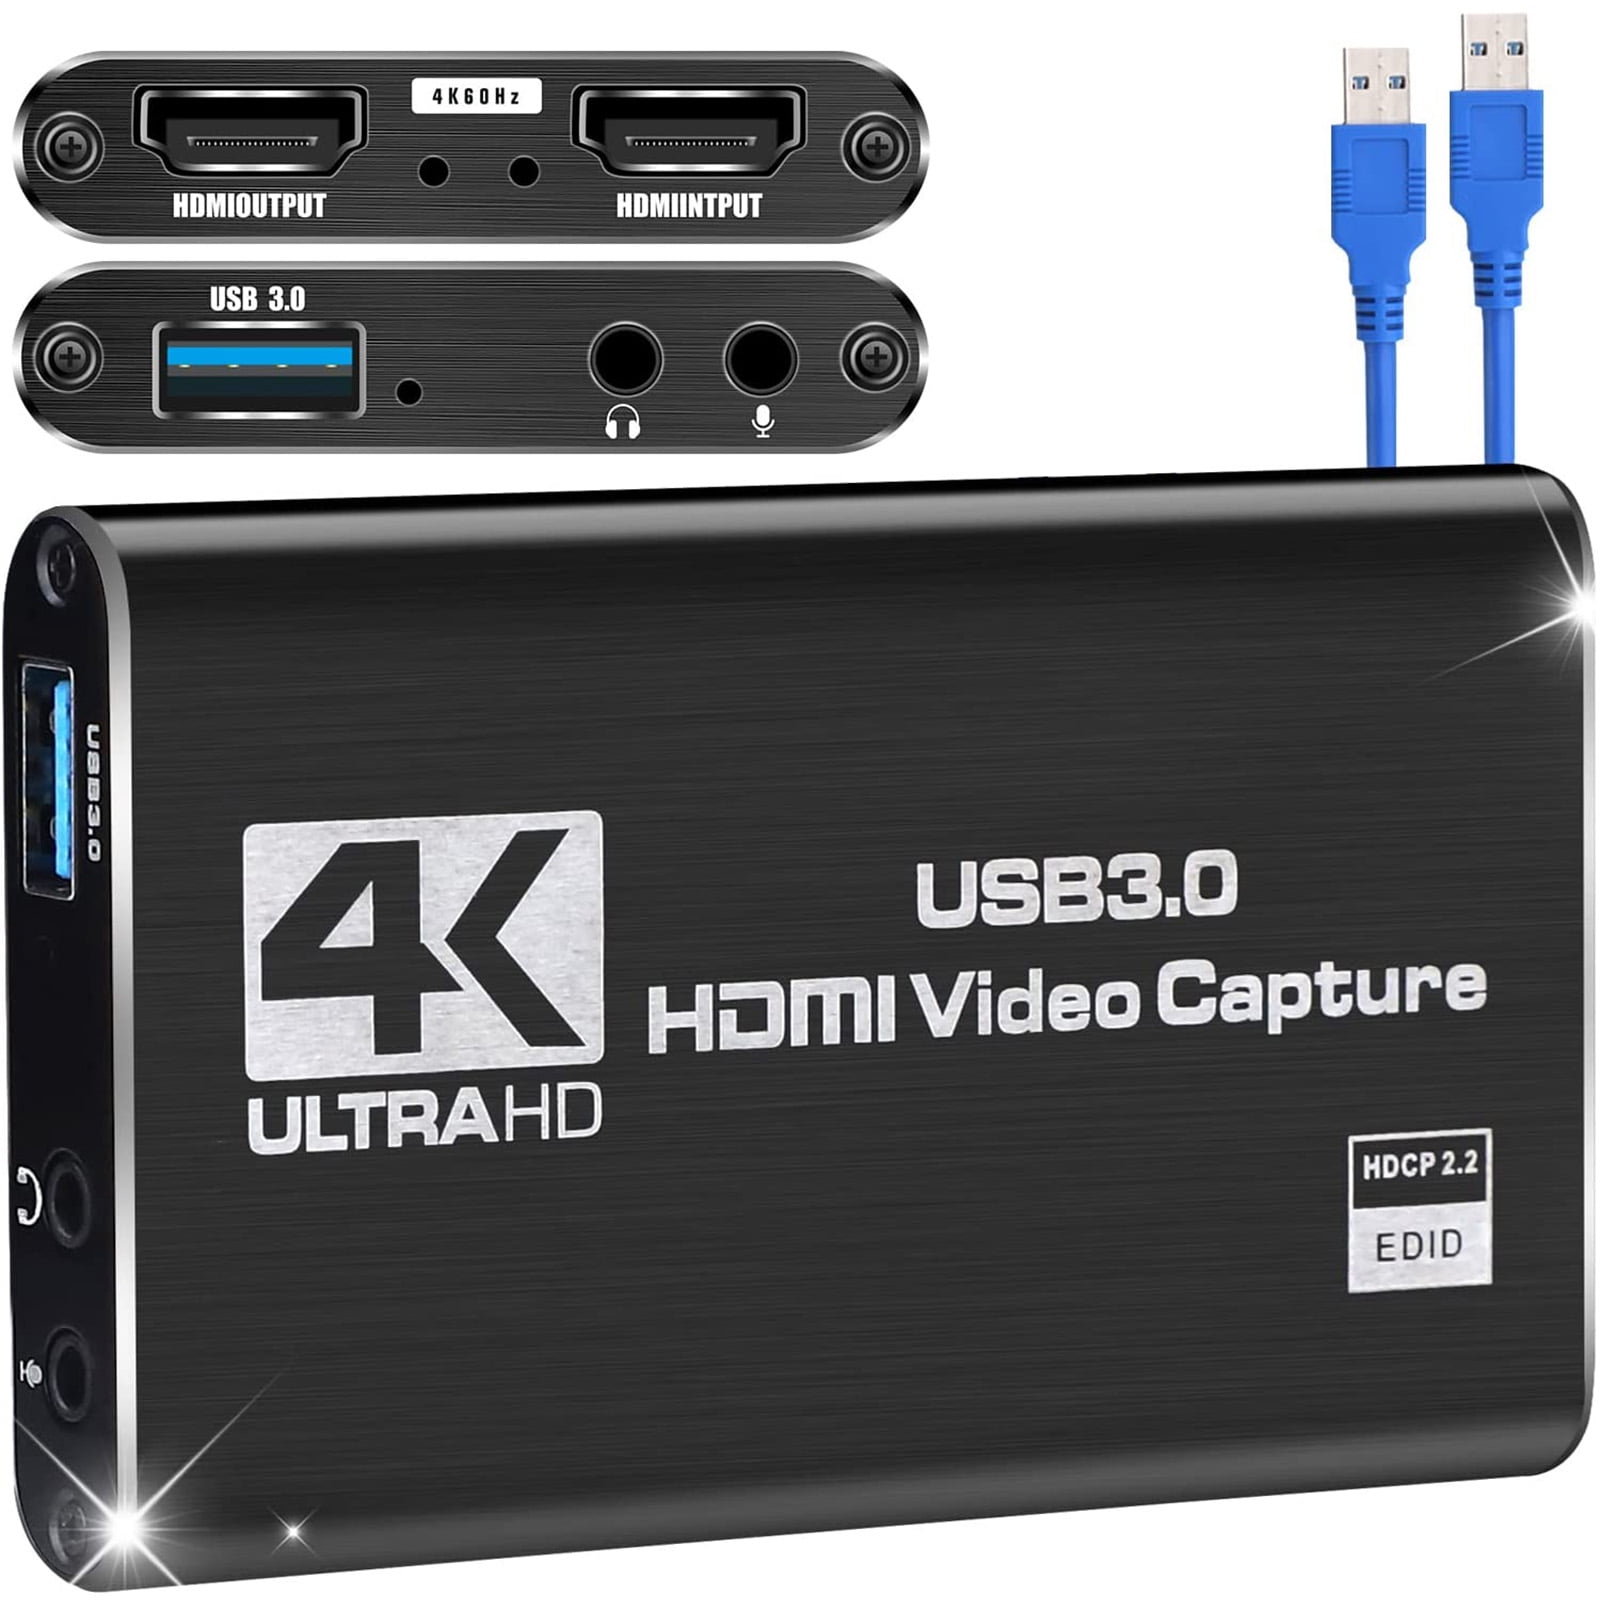 HDMI Video Capture Card Nintendo Switch, Game Capture 4K 1080P Nintendo Switch Card USB 3.0 for Streaming Video Recording, Screen Capture Device Work with PS4/PC/OBS/DSLR/Camera | Walmart Canada